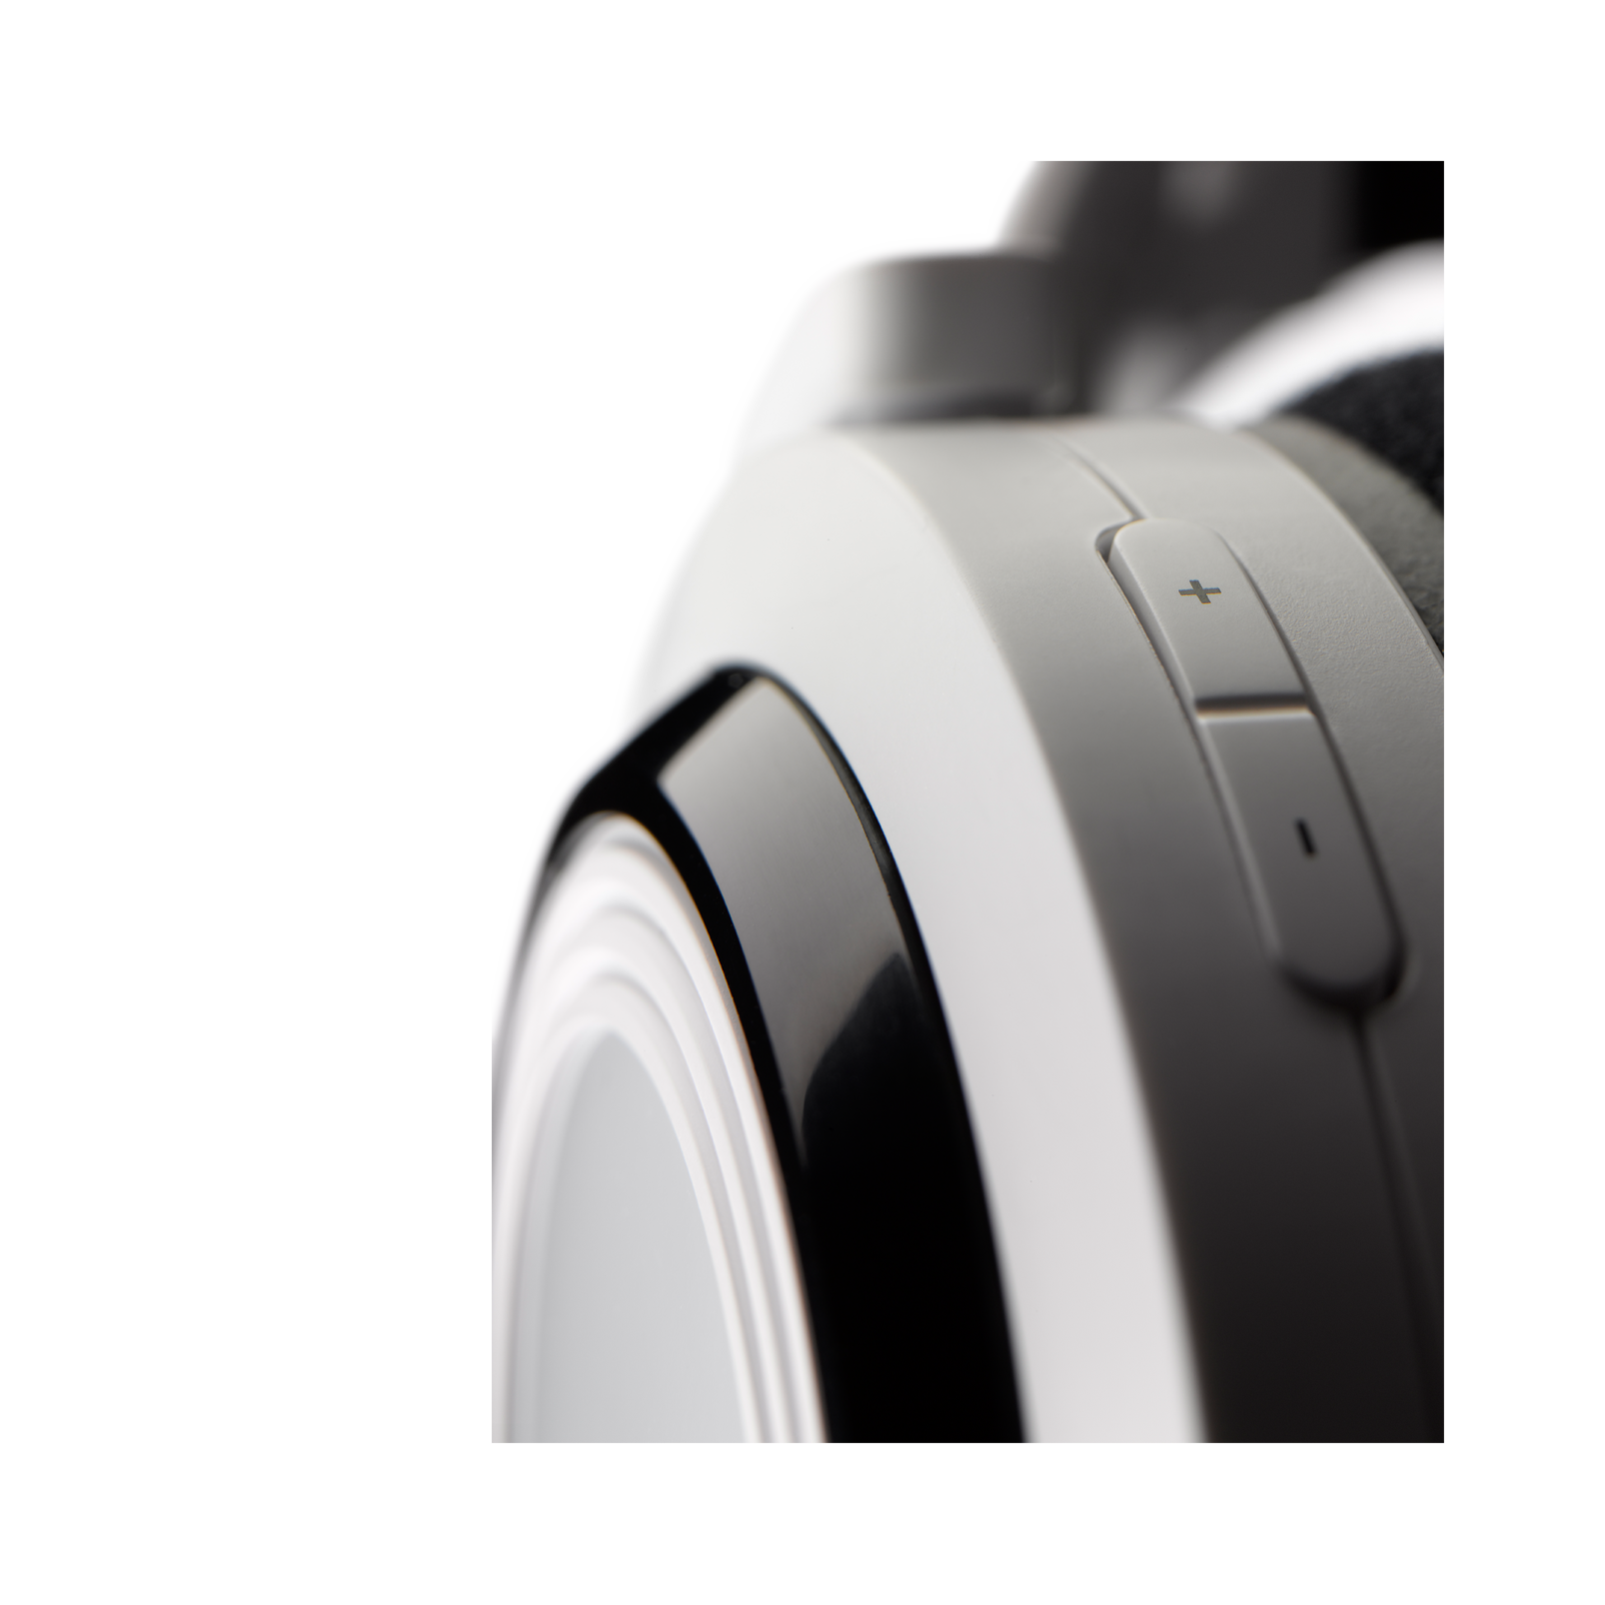 K 935 - White - High performance digital wireless stereo headphone optimized for movies, games and music - Detailshot 1